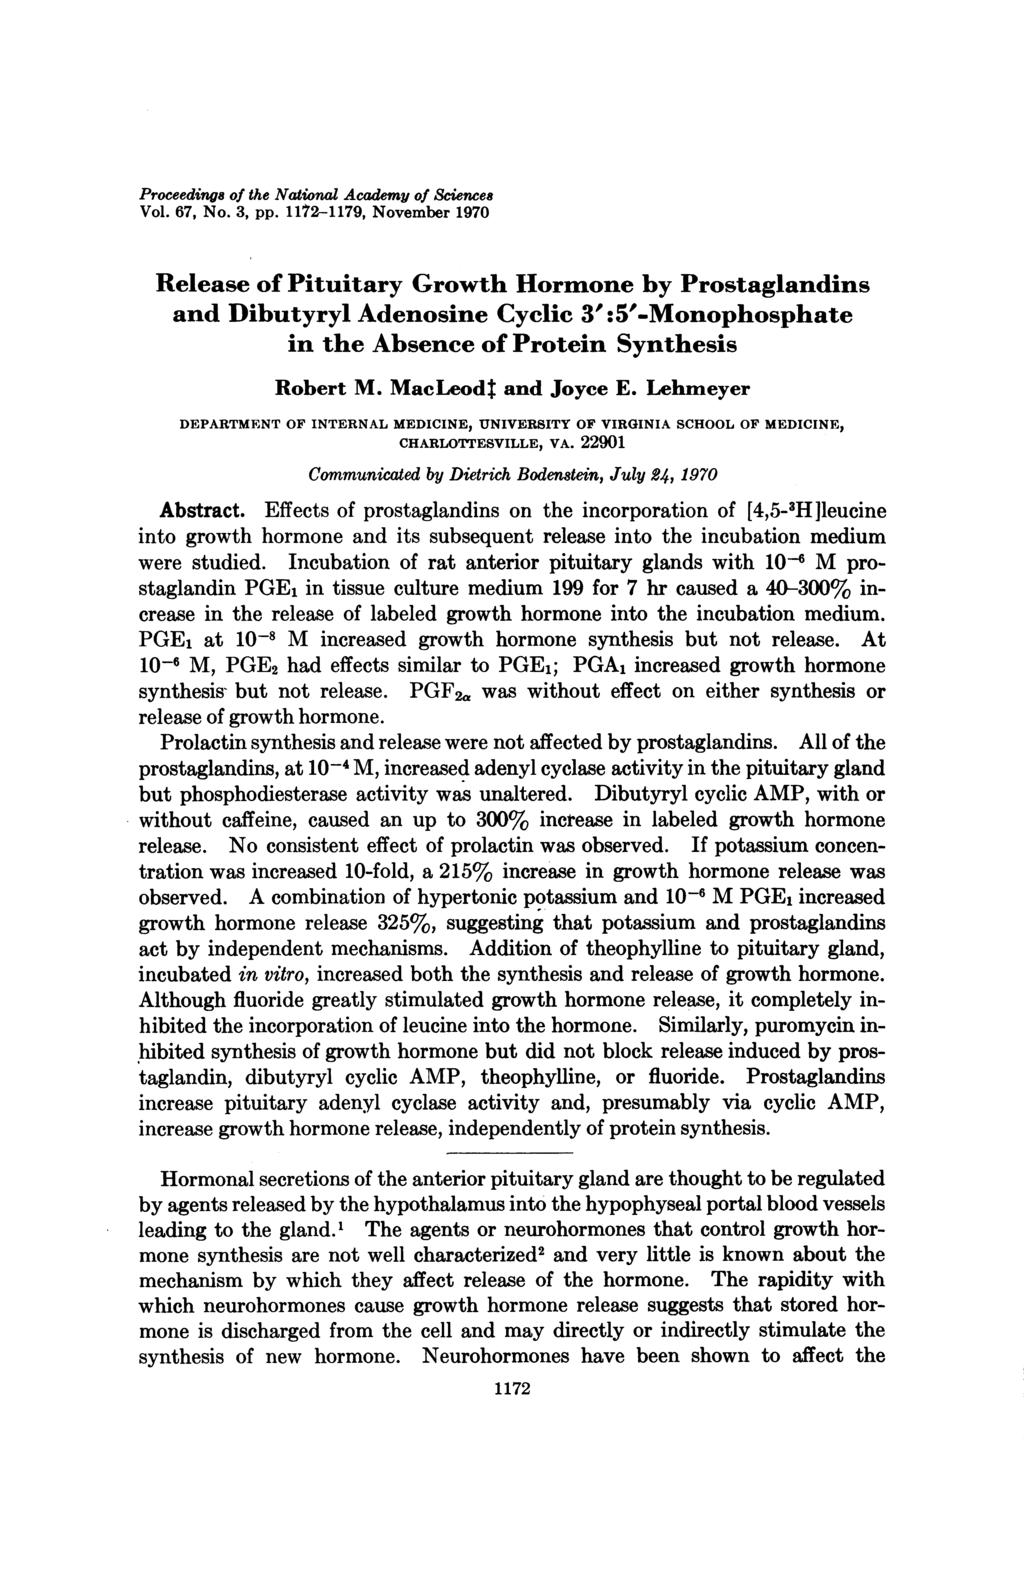 Proceedings of the National Academy of Sciences Vol. 67, No. 3, pp.